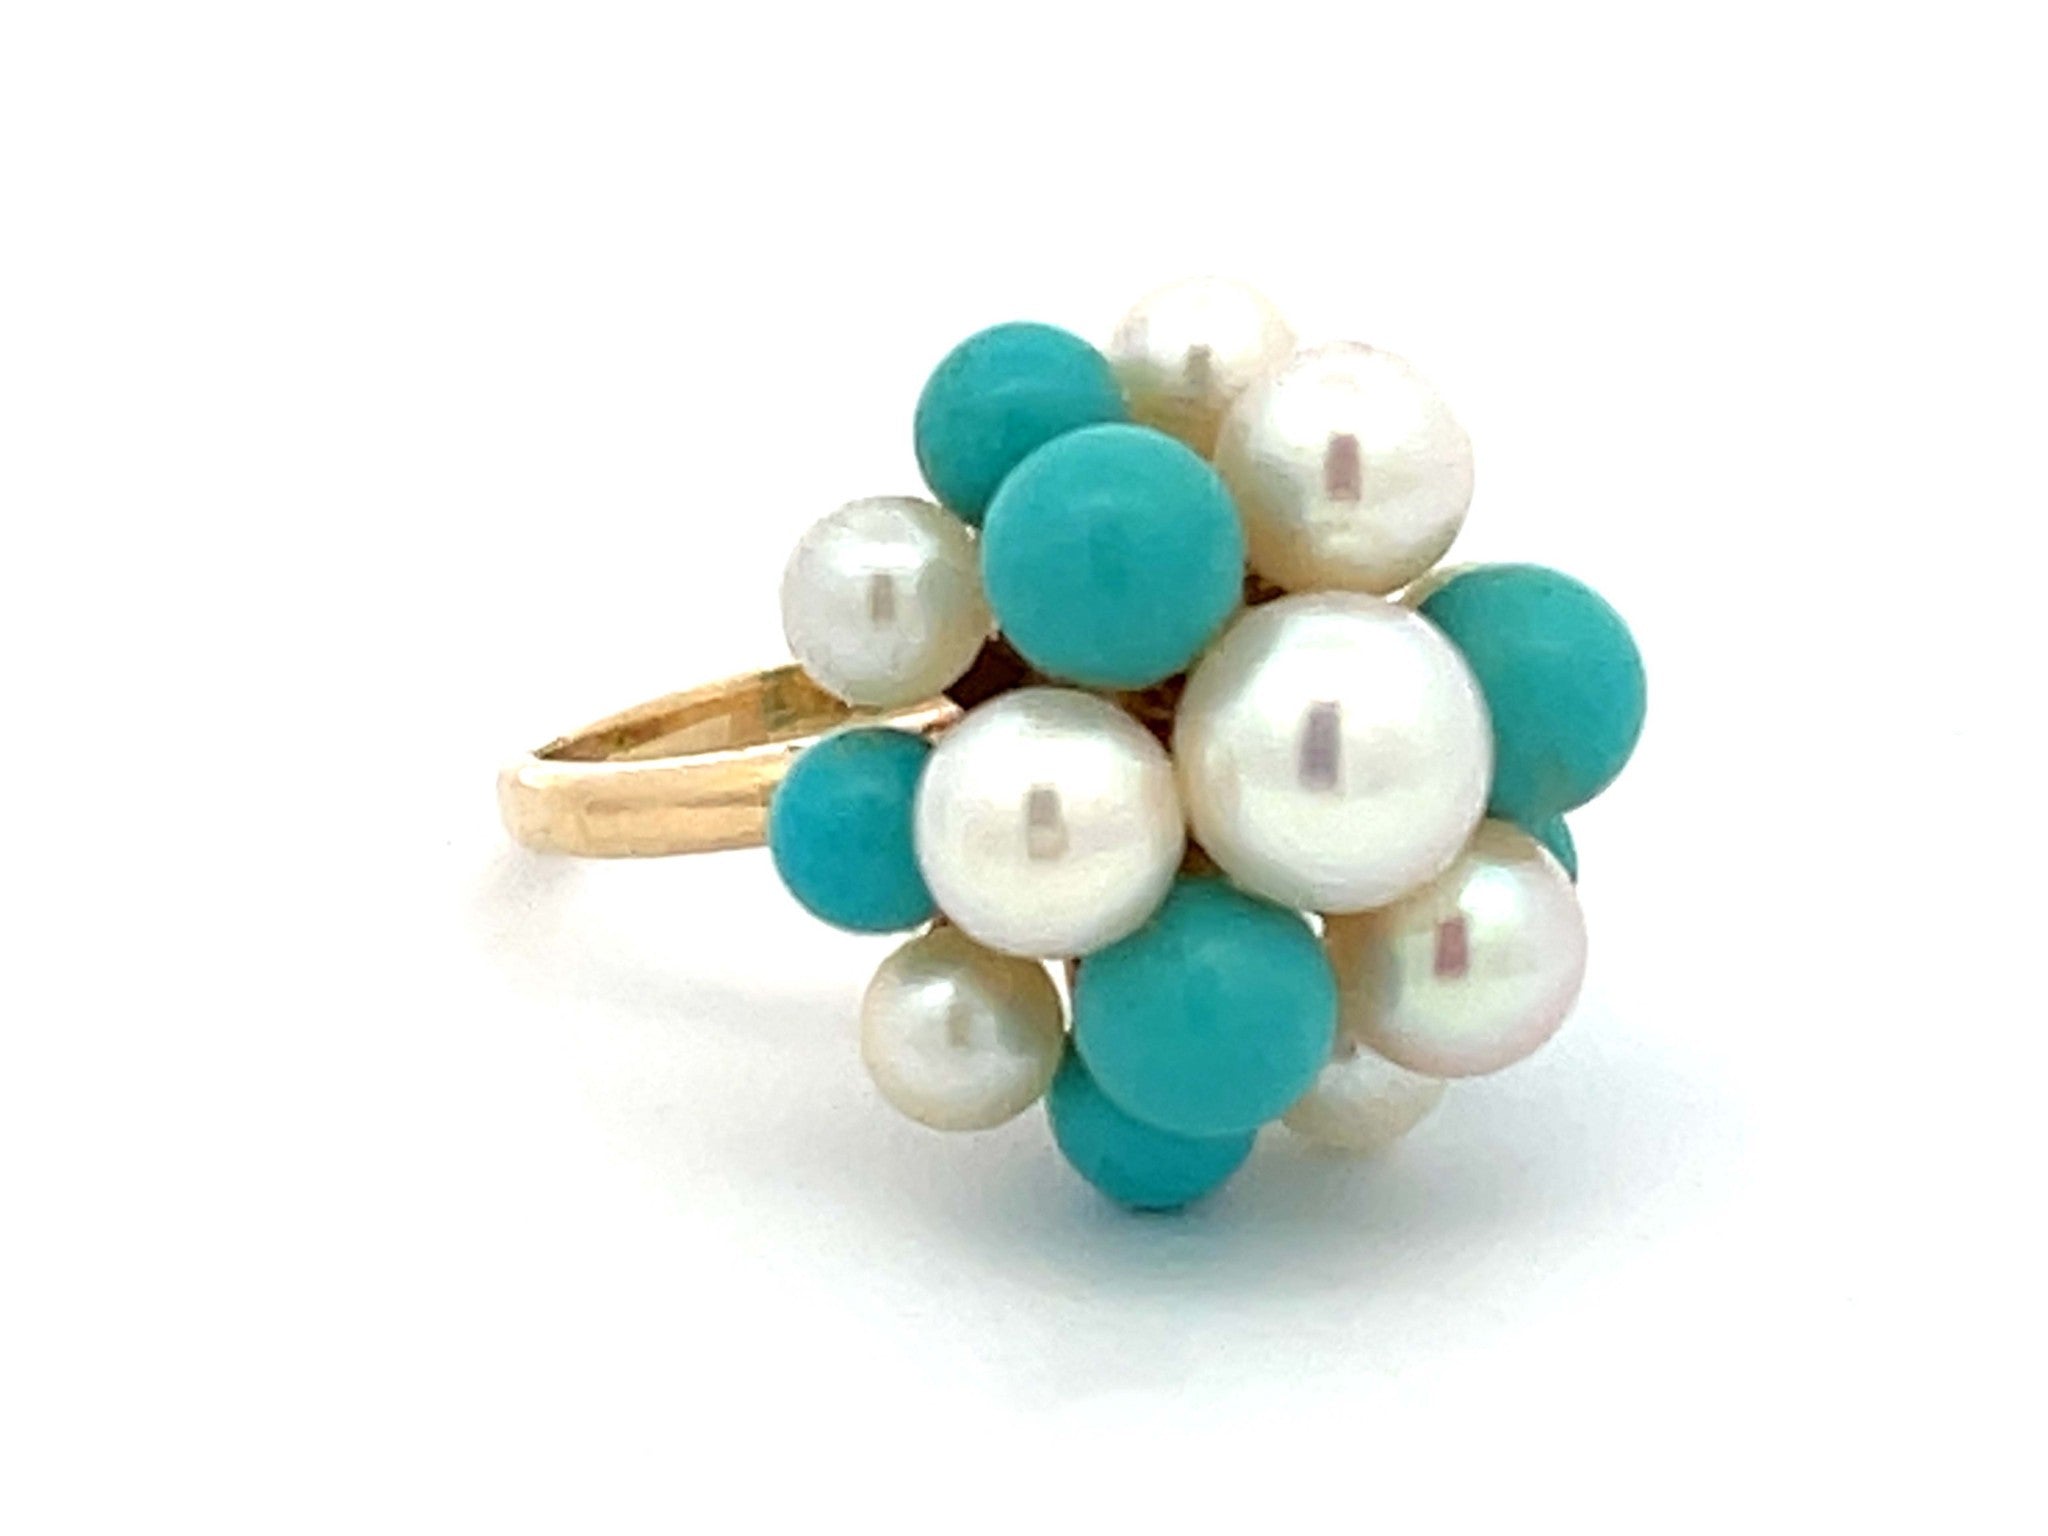 Mings Turquoise and Pearl Ring in 14k Yellow Gold